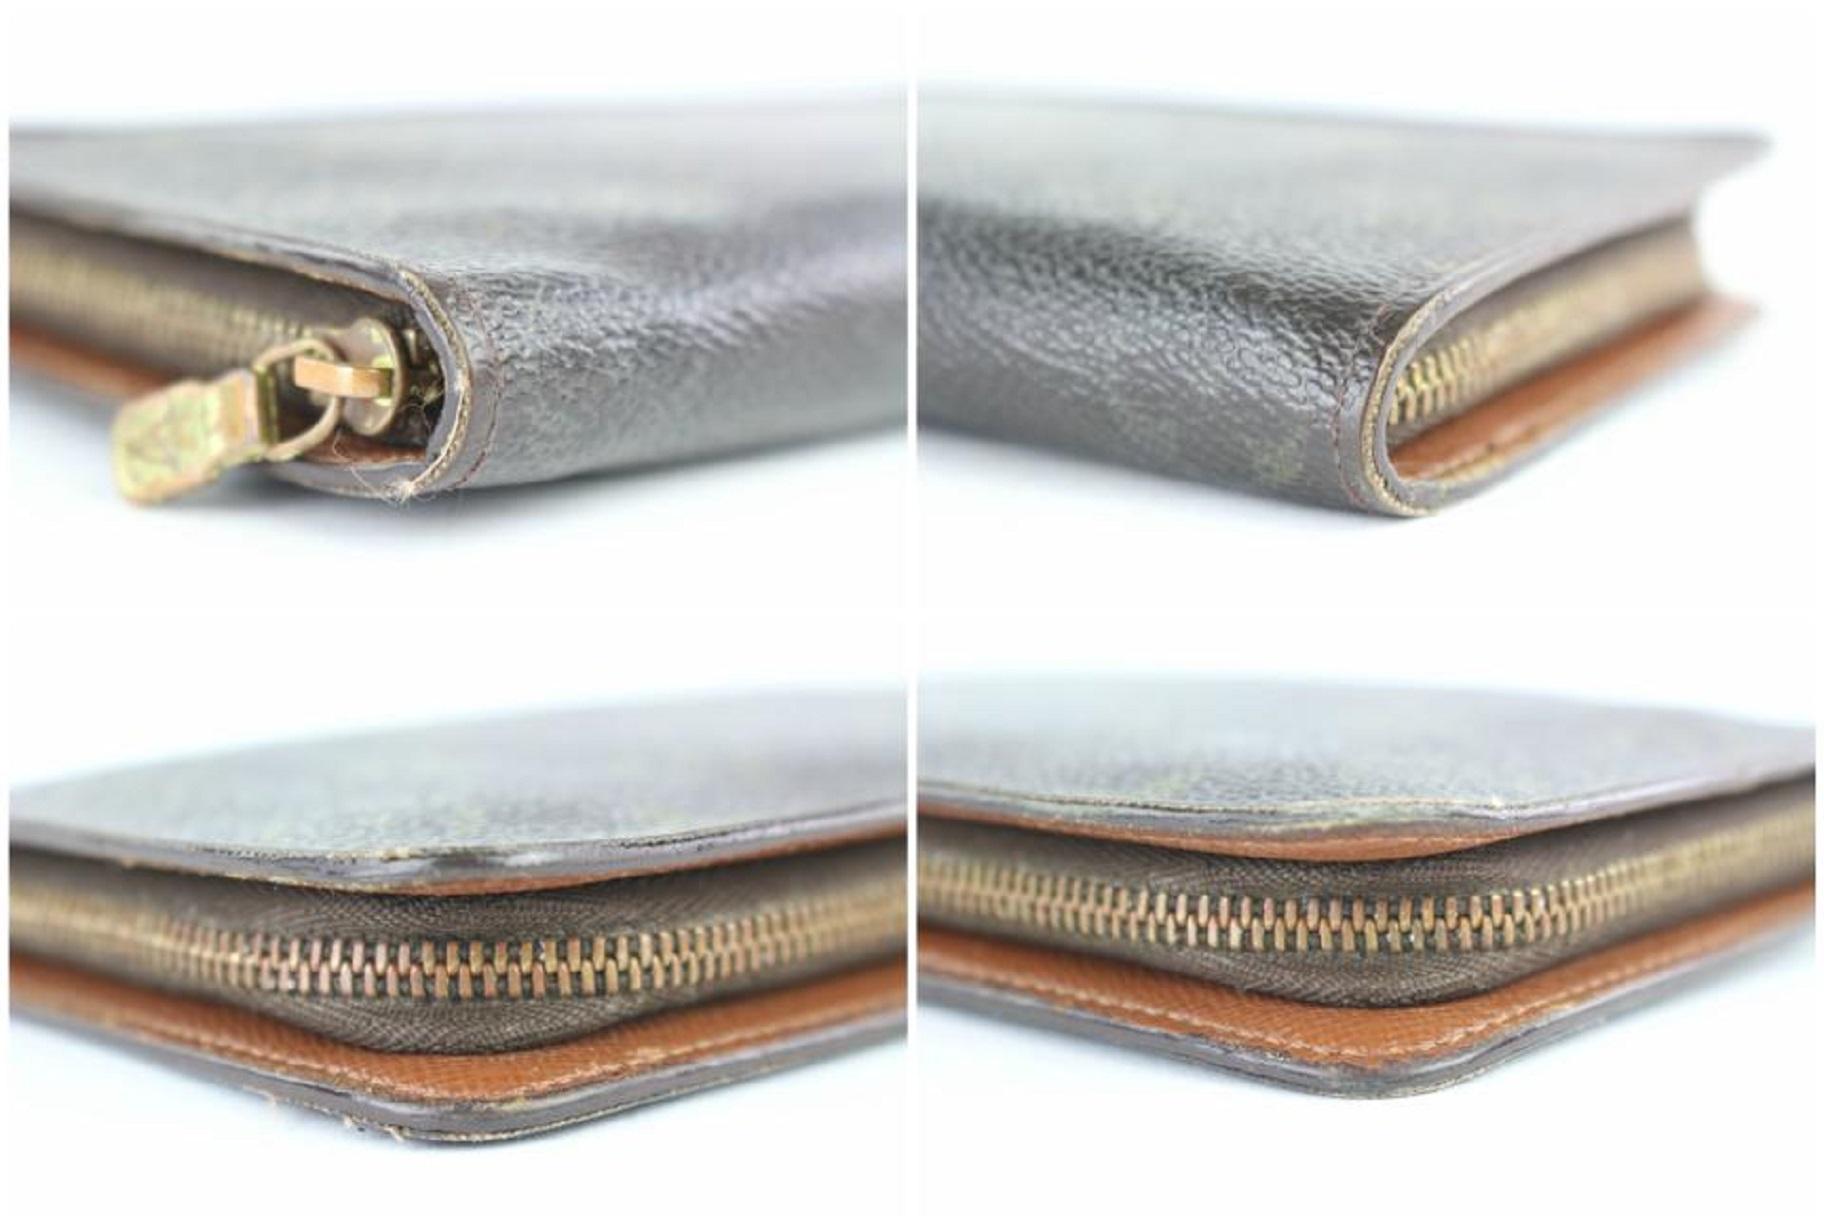 Louis Vuitton Long Wallet Monogram Zippy 3lj0111 Brown Coated Canvas Wristlet In Good Condition For Sale In Dix hills, NY